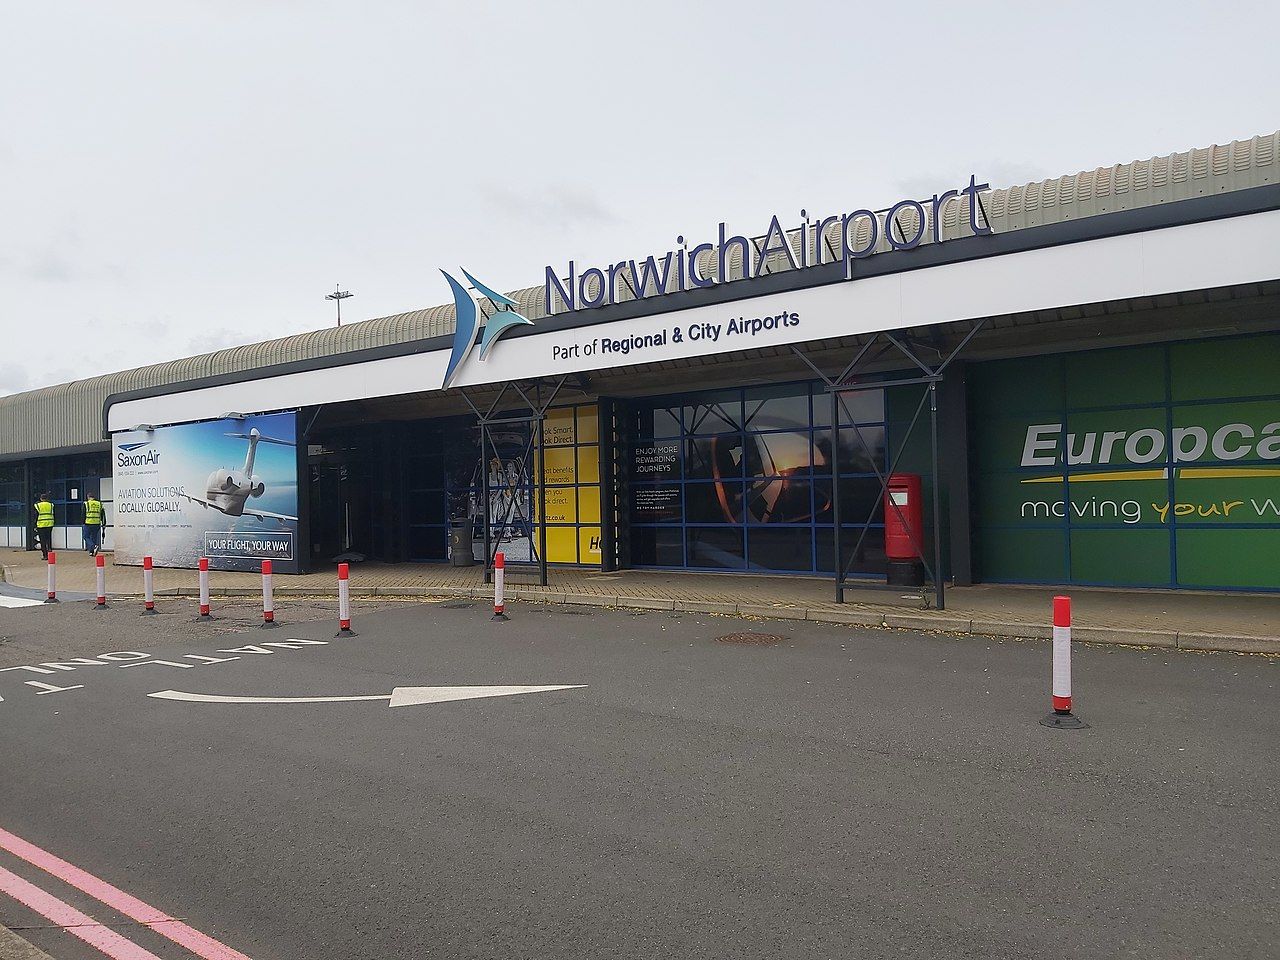 thorpe travel norwich airport